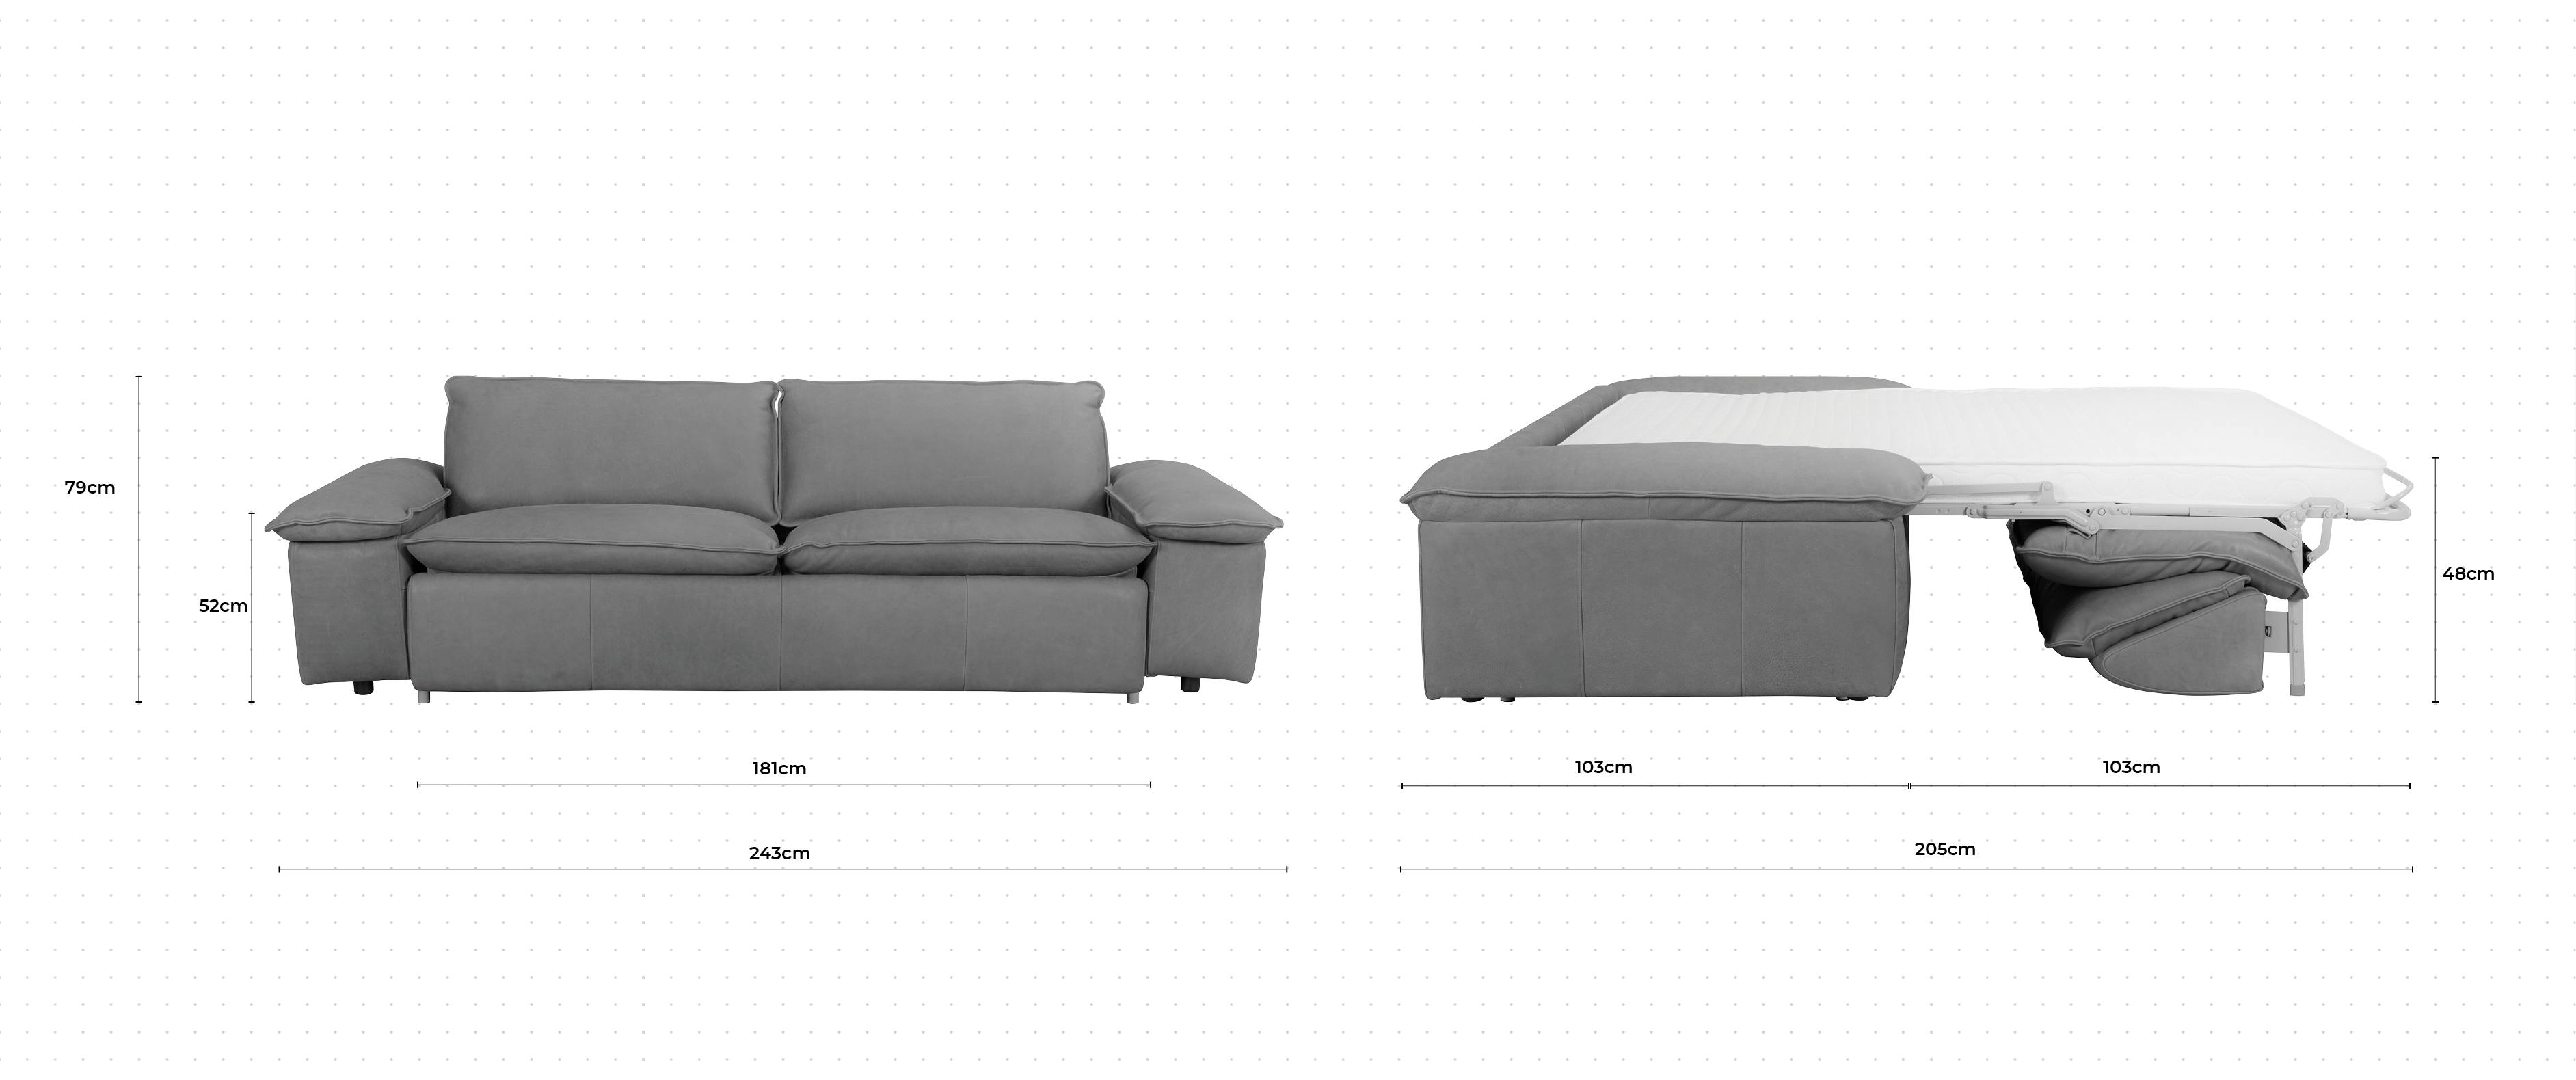 Christopher 3 Seater Sofa Bed dimensions